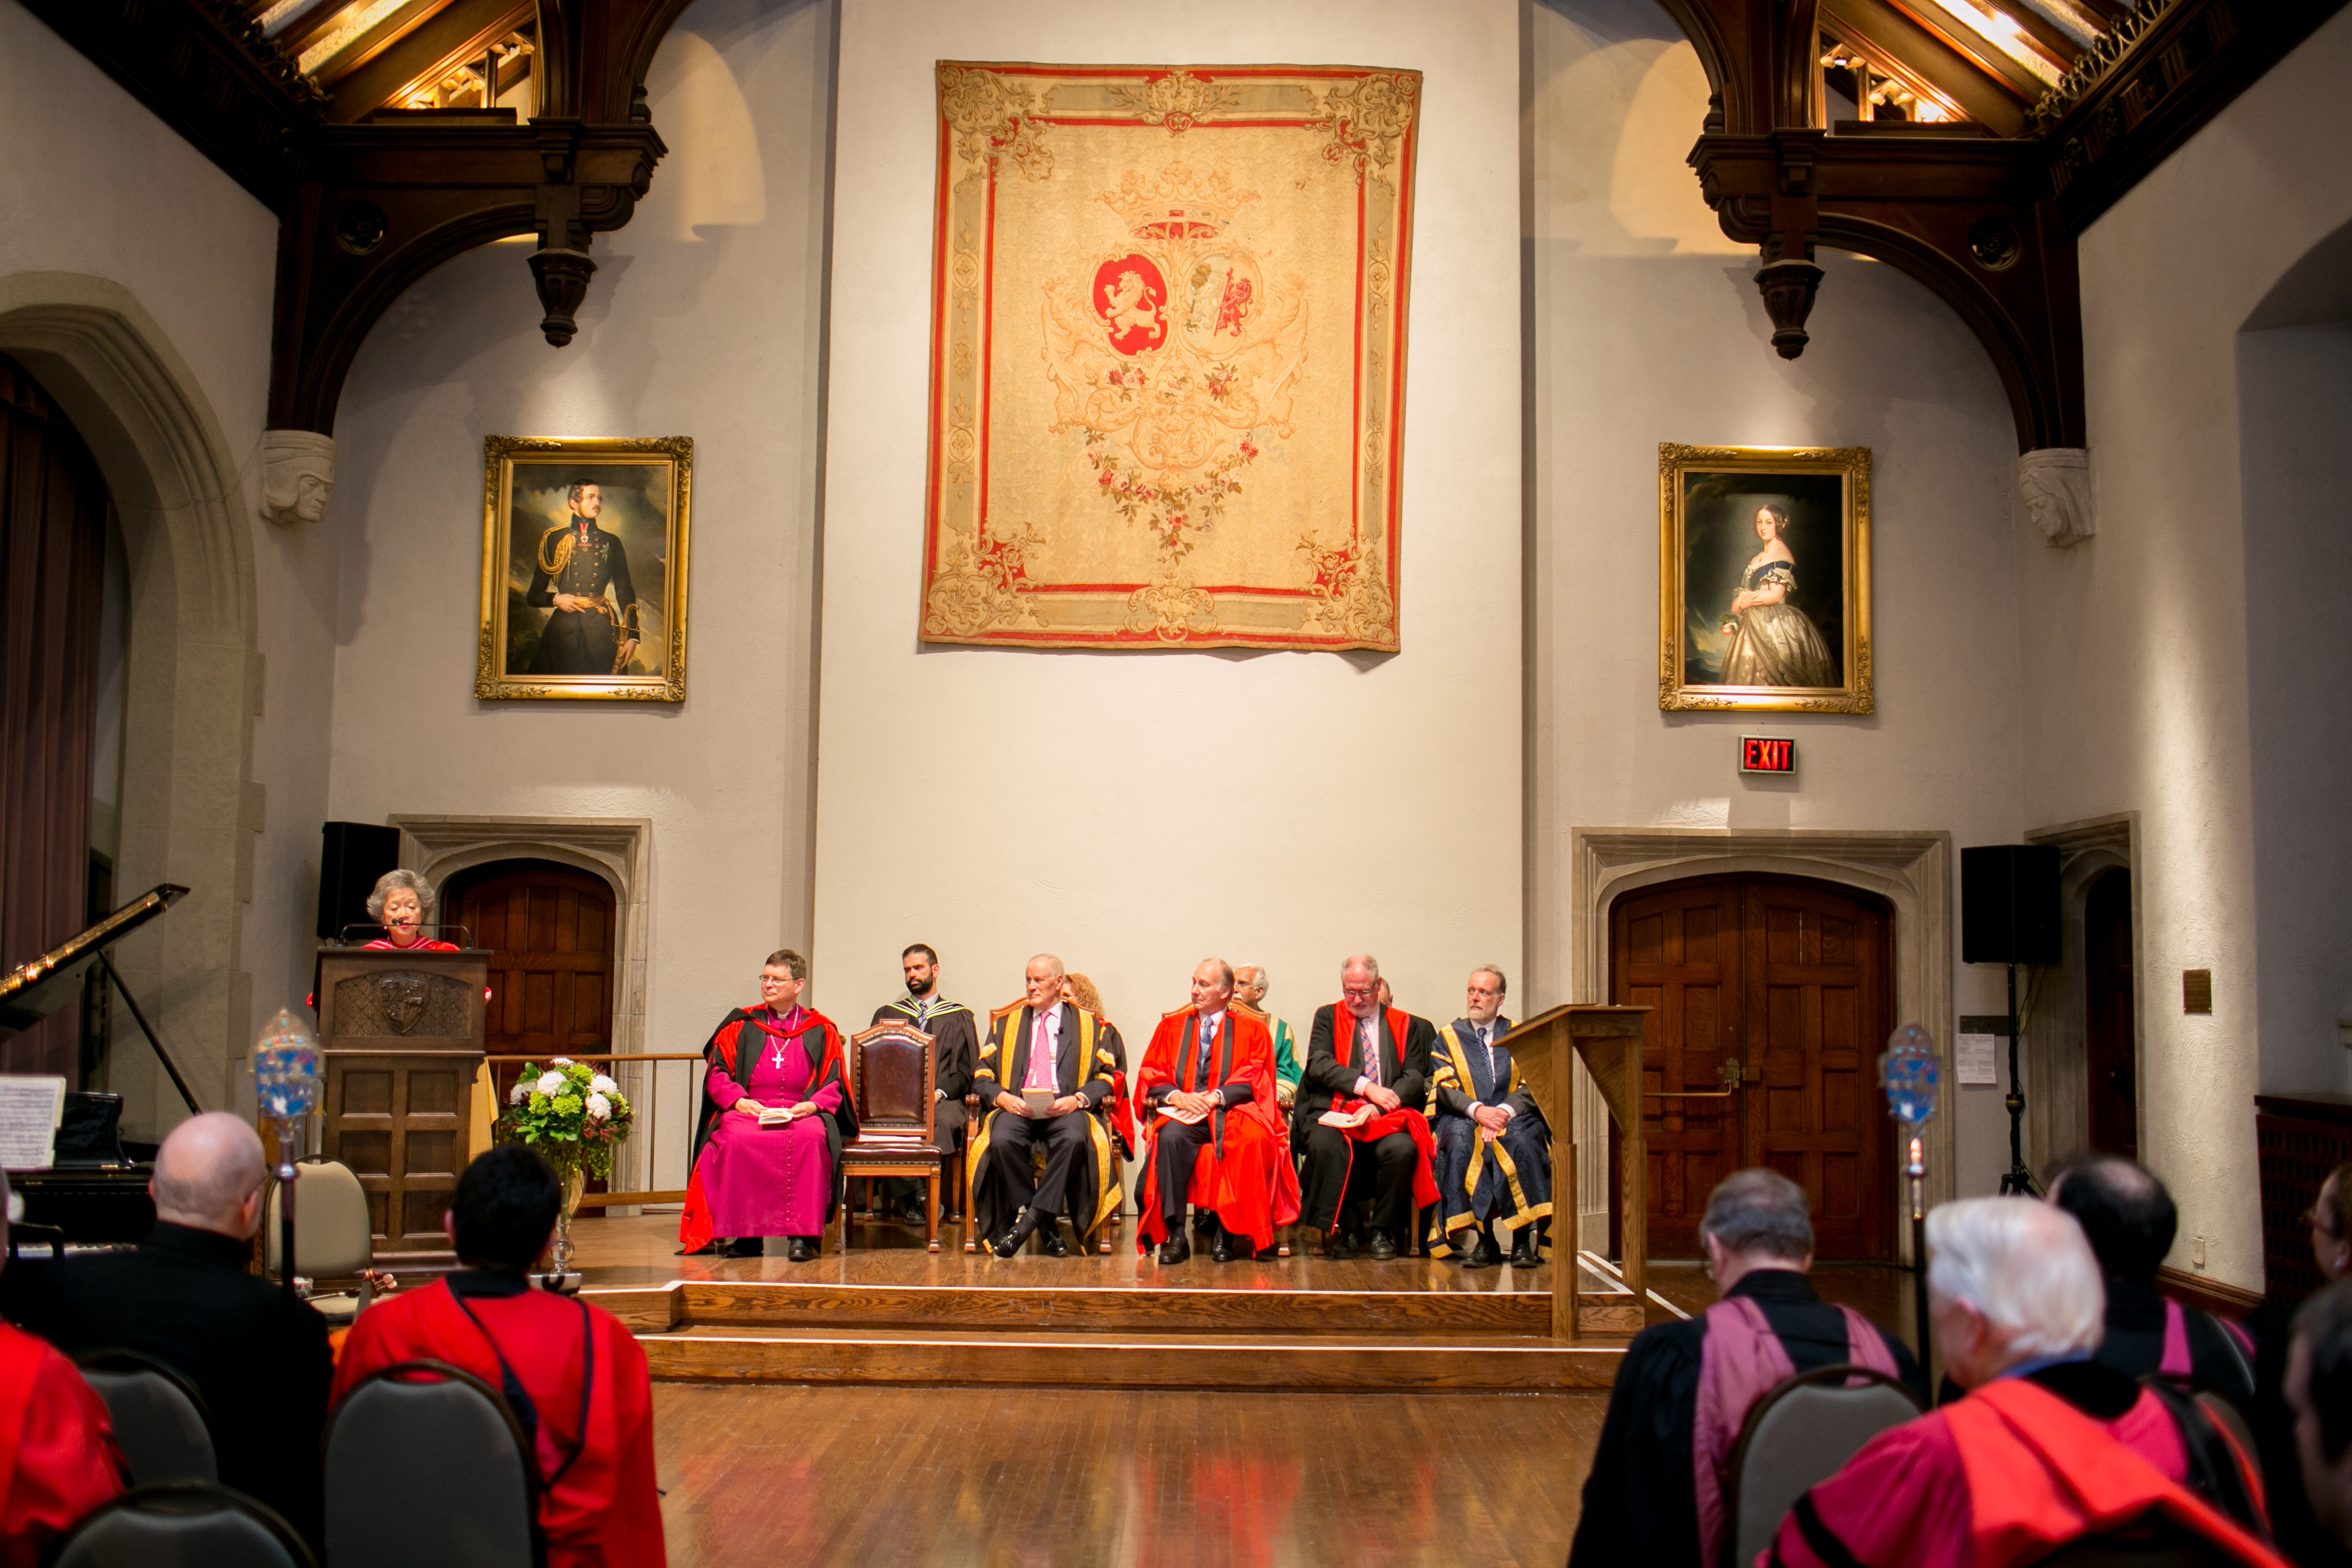 The special convocation ceremony took place at Trinity College’s Seeley Hall. Photo: Mo Govindji